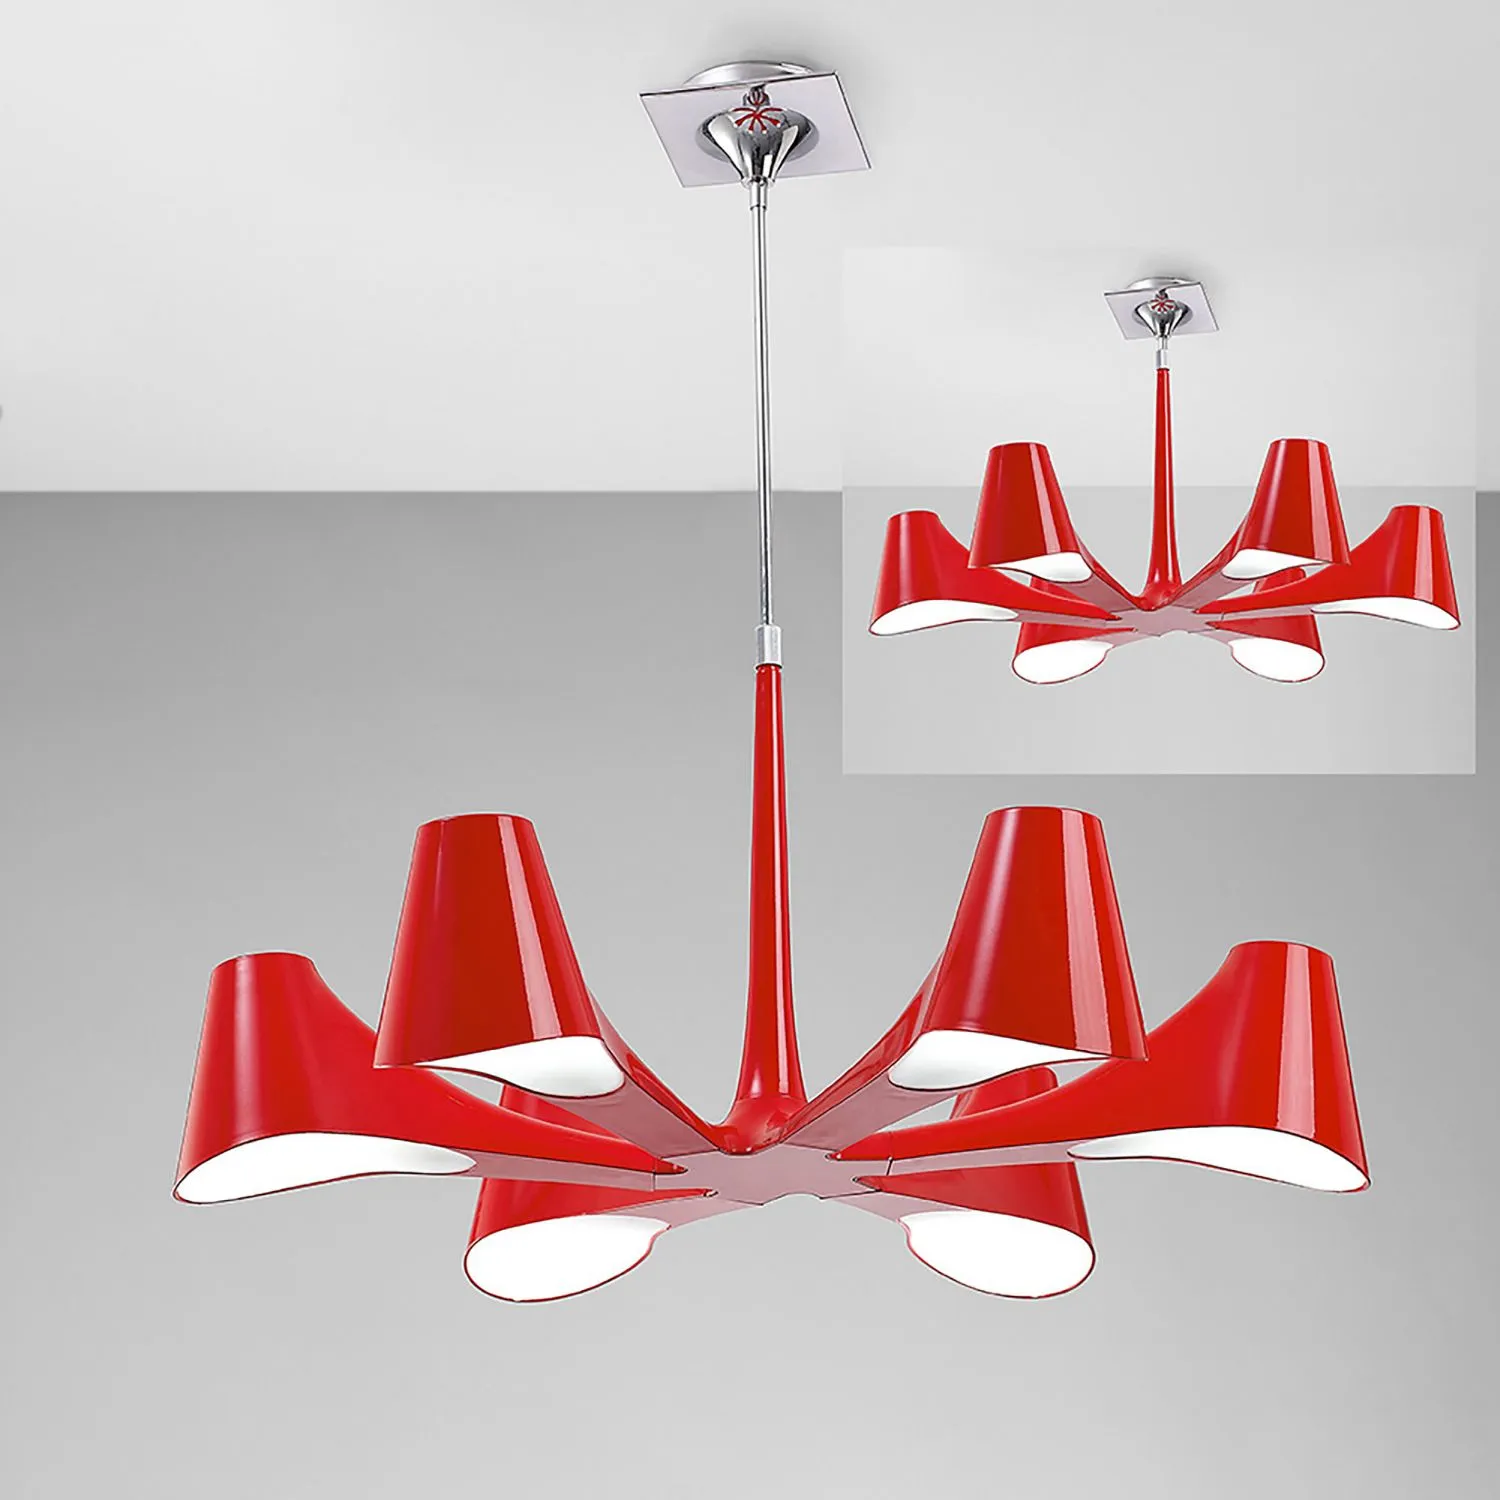 Ora Telescopic Convertible To Semi Flush 6 Light E27, Gloss Red White Acrylic Polished Chrome, CFL Lamps INCLUDED